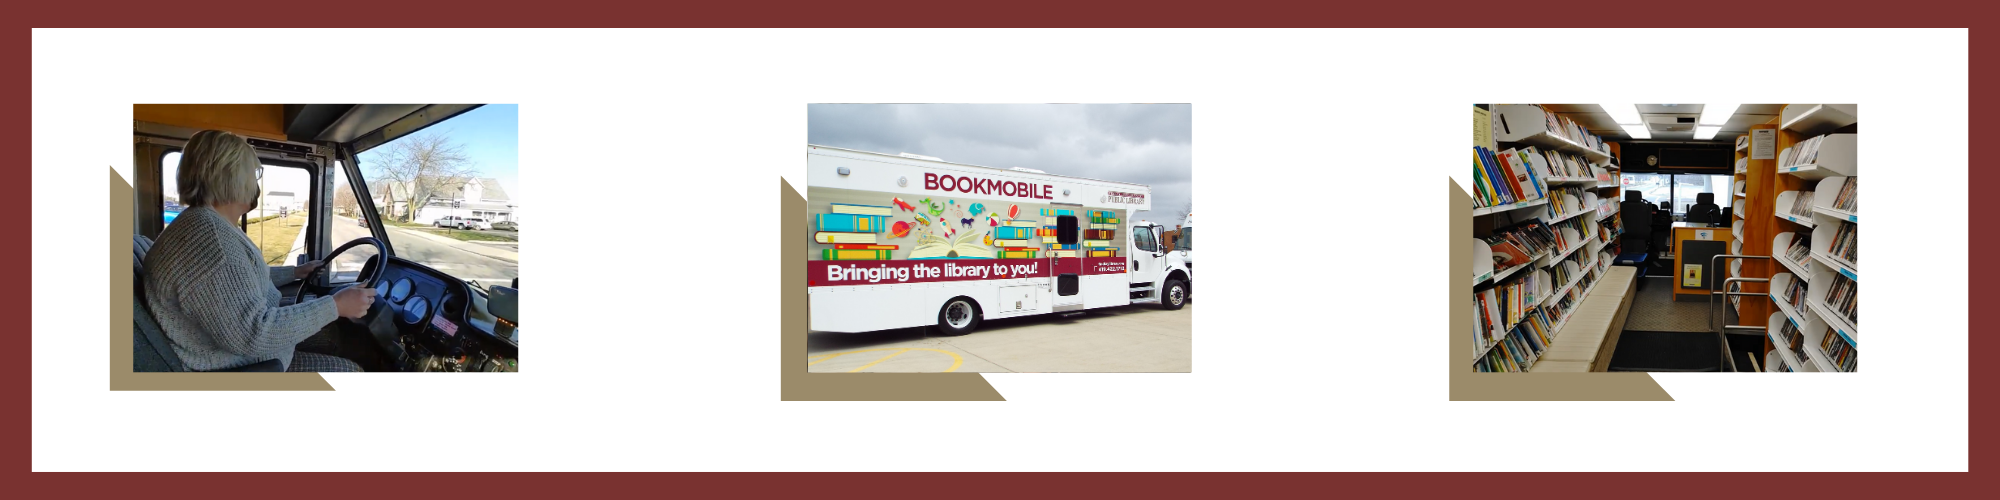 photos of bookmobile and inside of bookmobile with books and videos on shelves